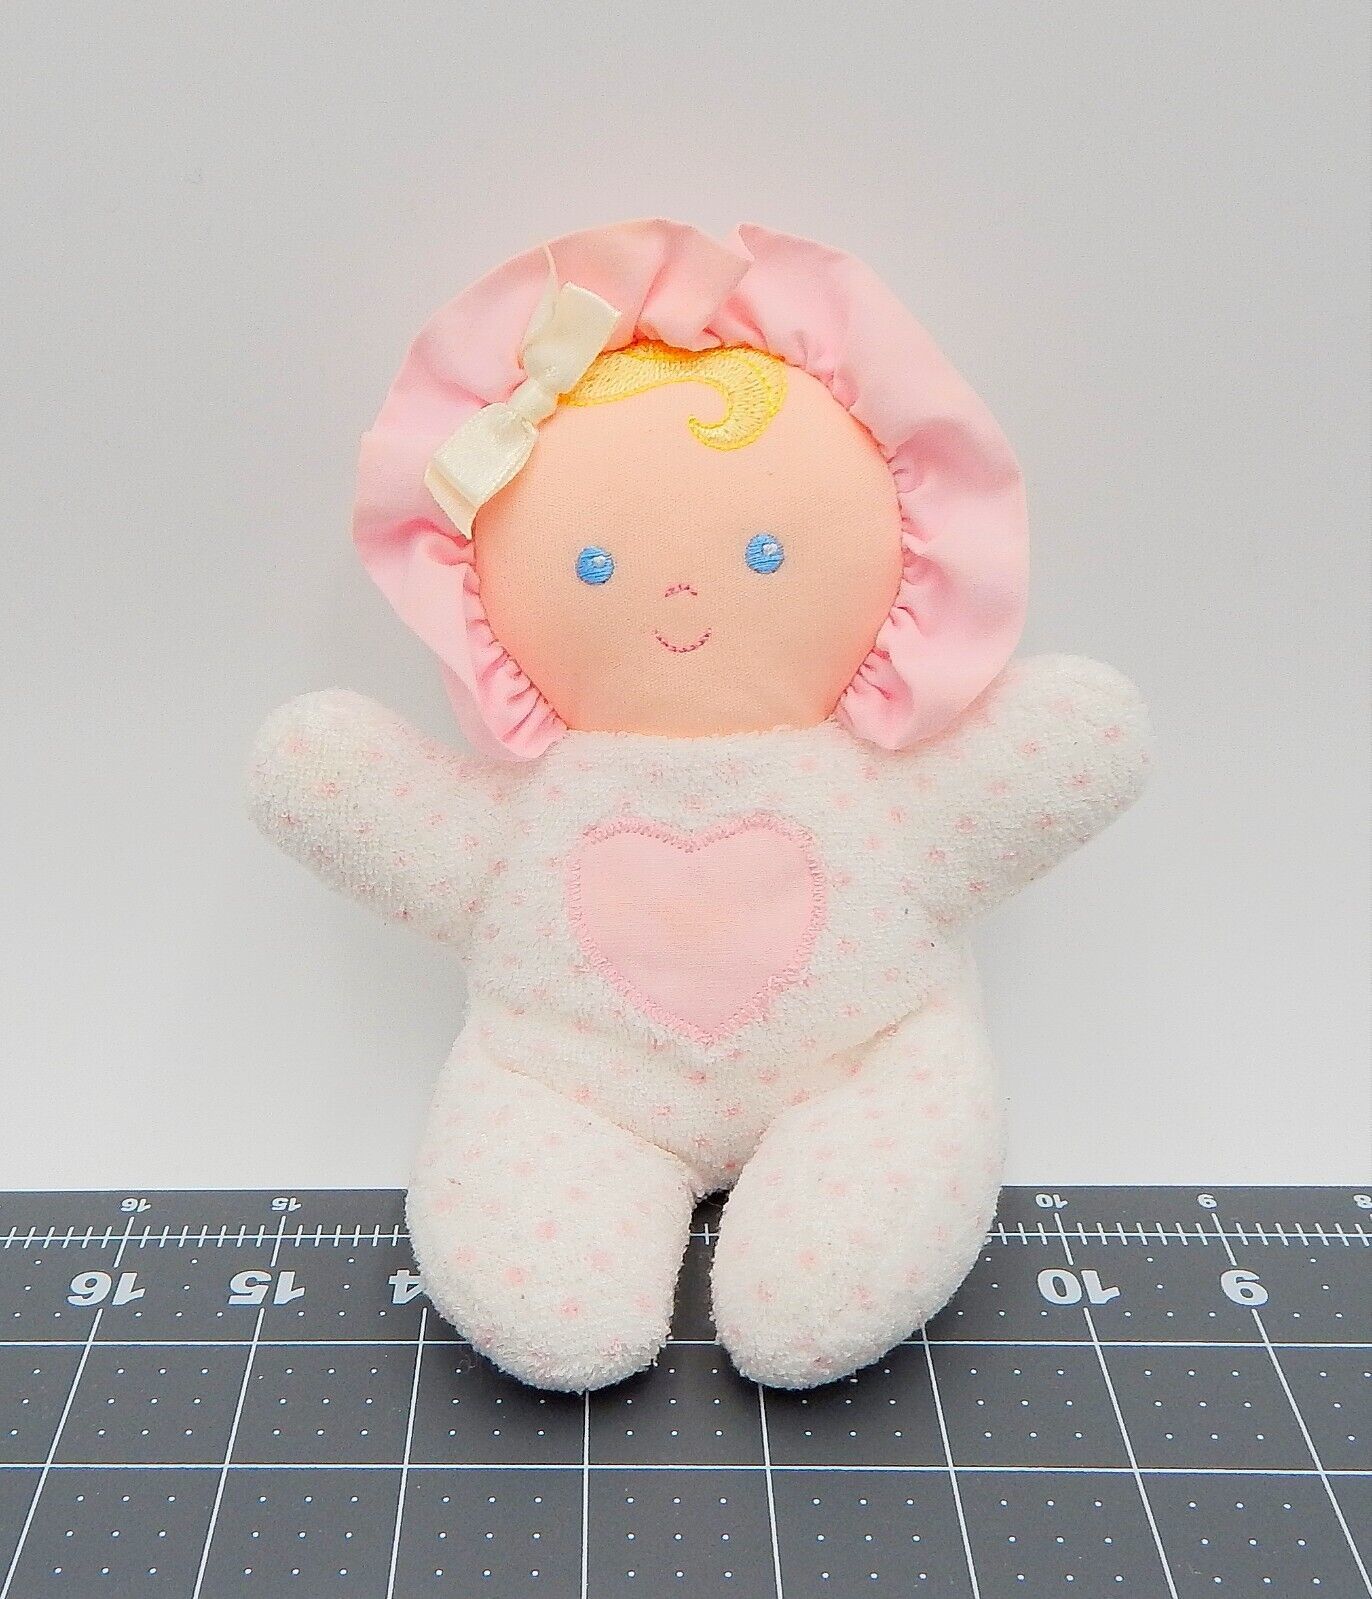 Eden Baby Doll Rattle Pink Heart Bonnet Terry Cloth White Polka Dot Lovey 7 Inch - $25.99